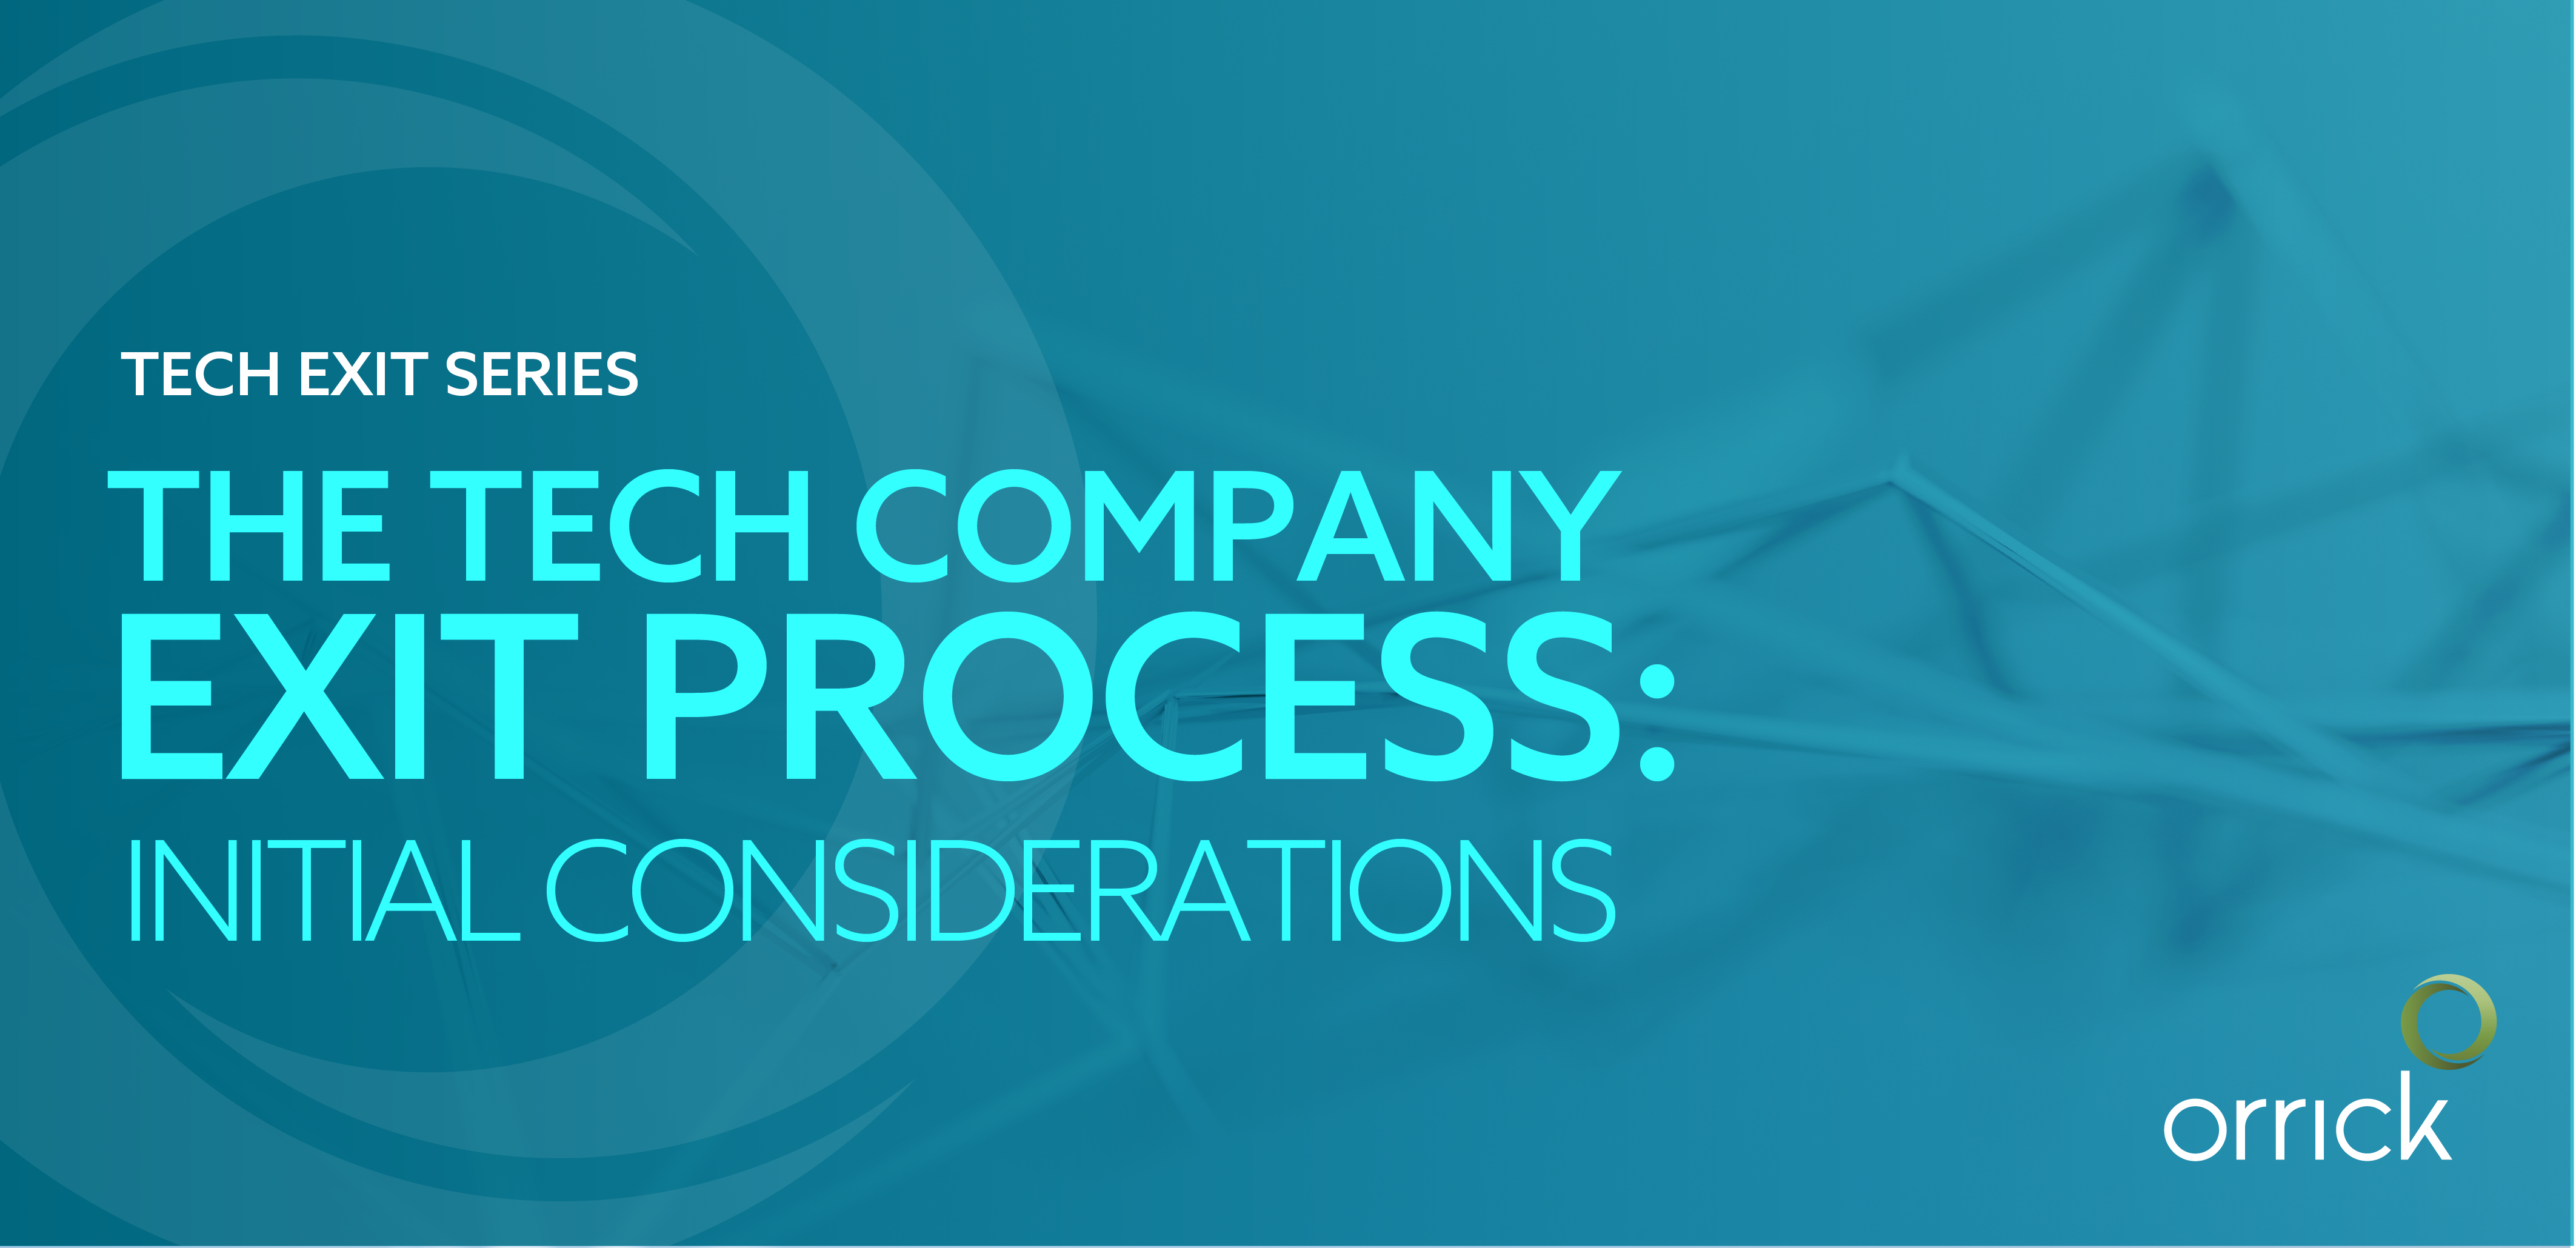 Orrick Tech Exit Series - The Tech Company Exit Process: Initial Considerations